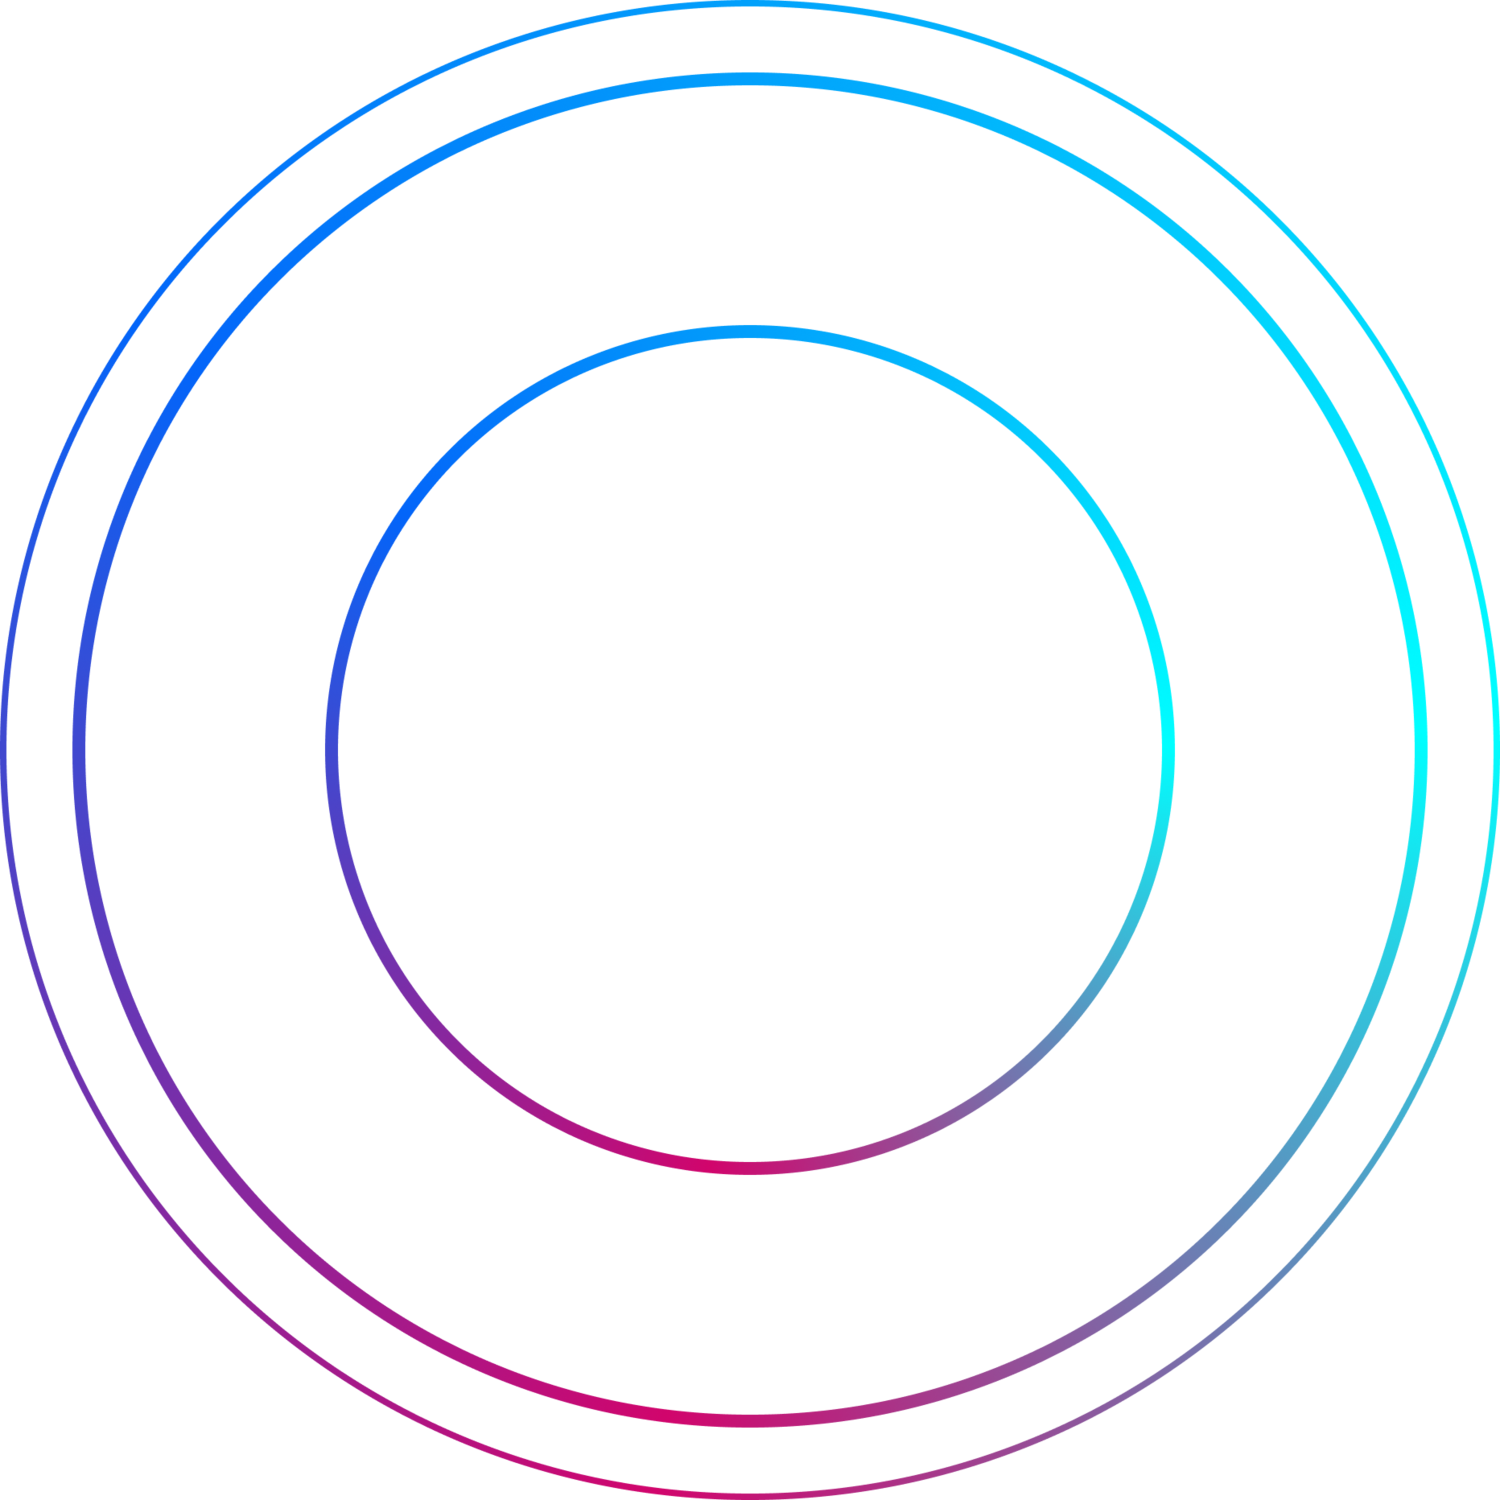 imagen-del-bootcamp-<p>Bootcamp Mobile<span style="color: rgb(209, 5, 108);"> iOS</span></p>